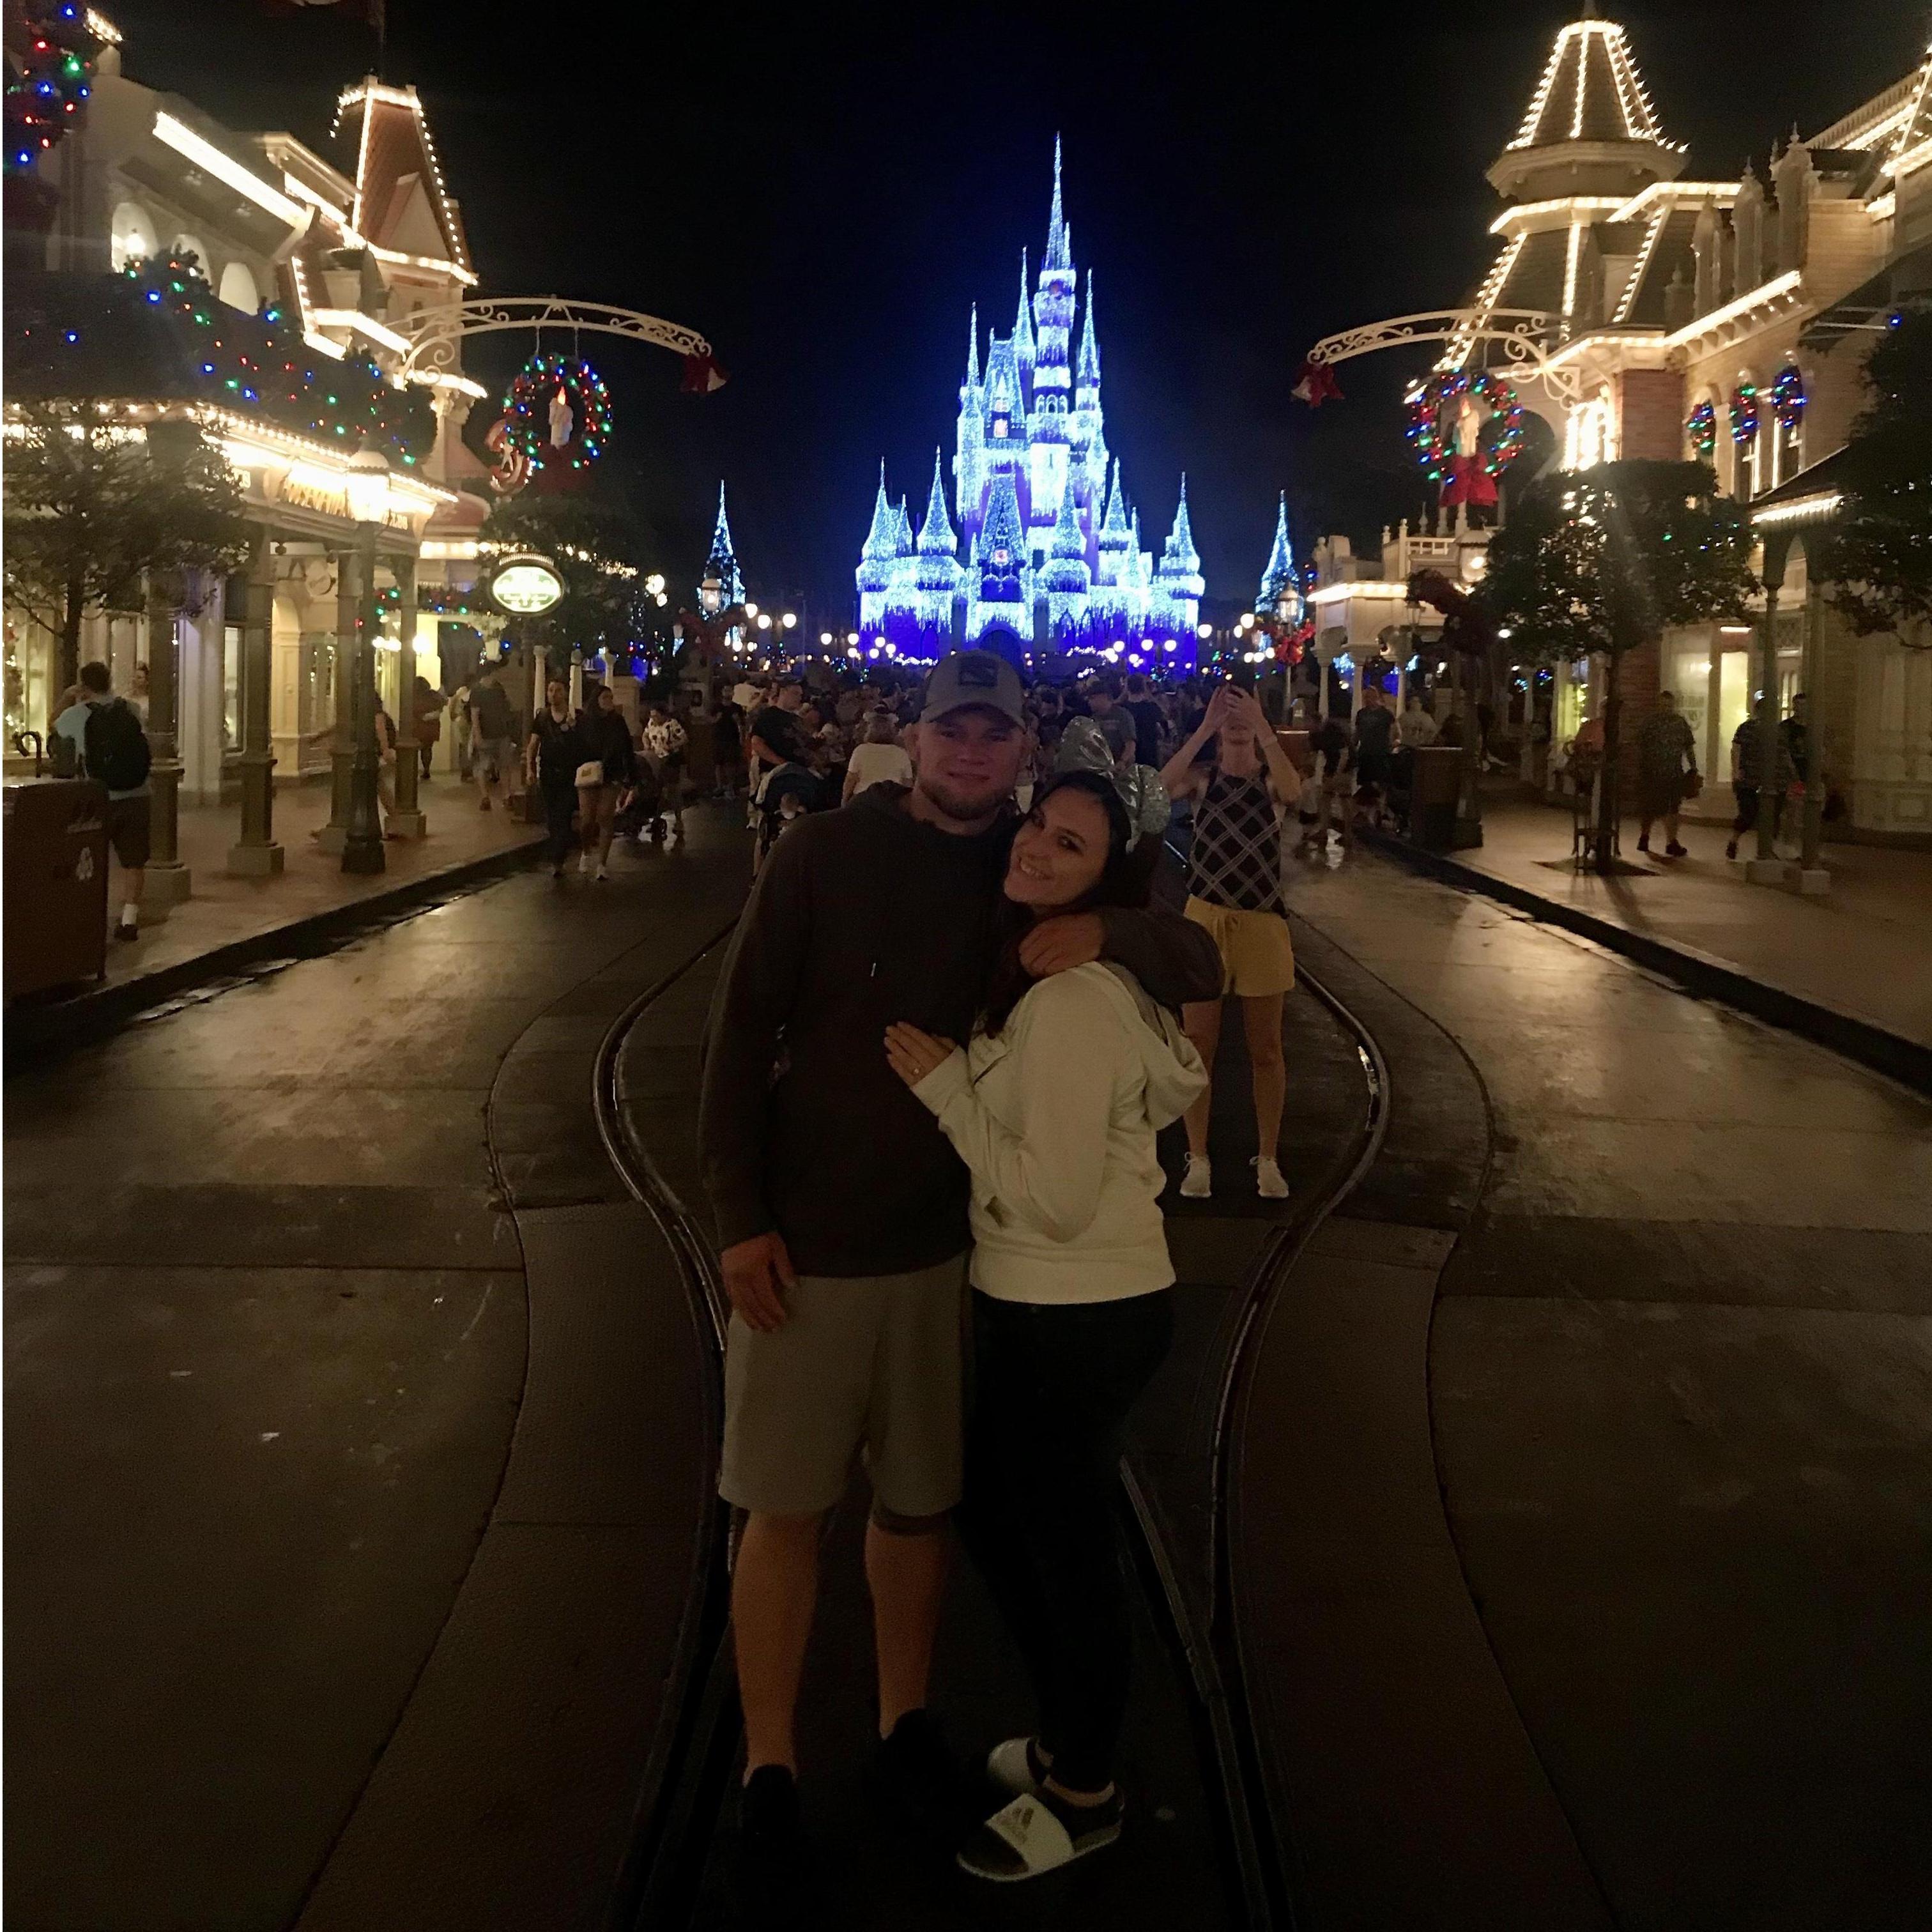 A few of Alex's favorite things, Mike, Disney, and Christmas at Disney